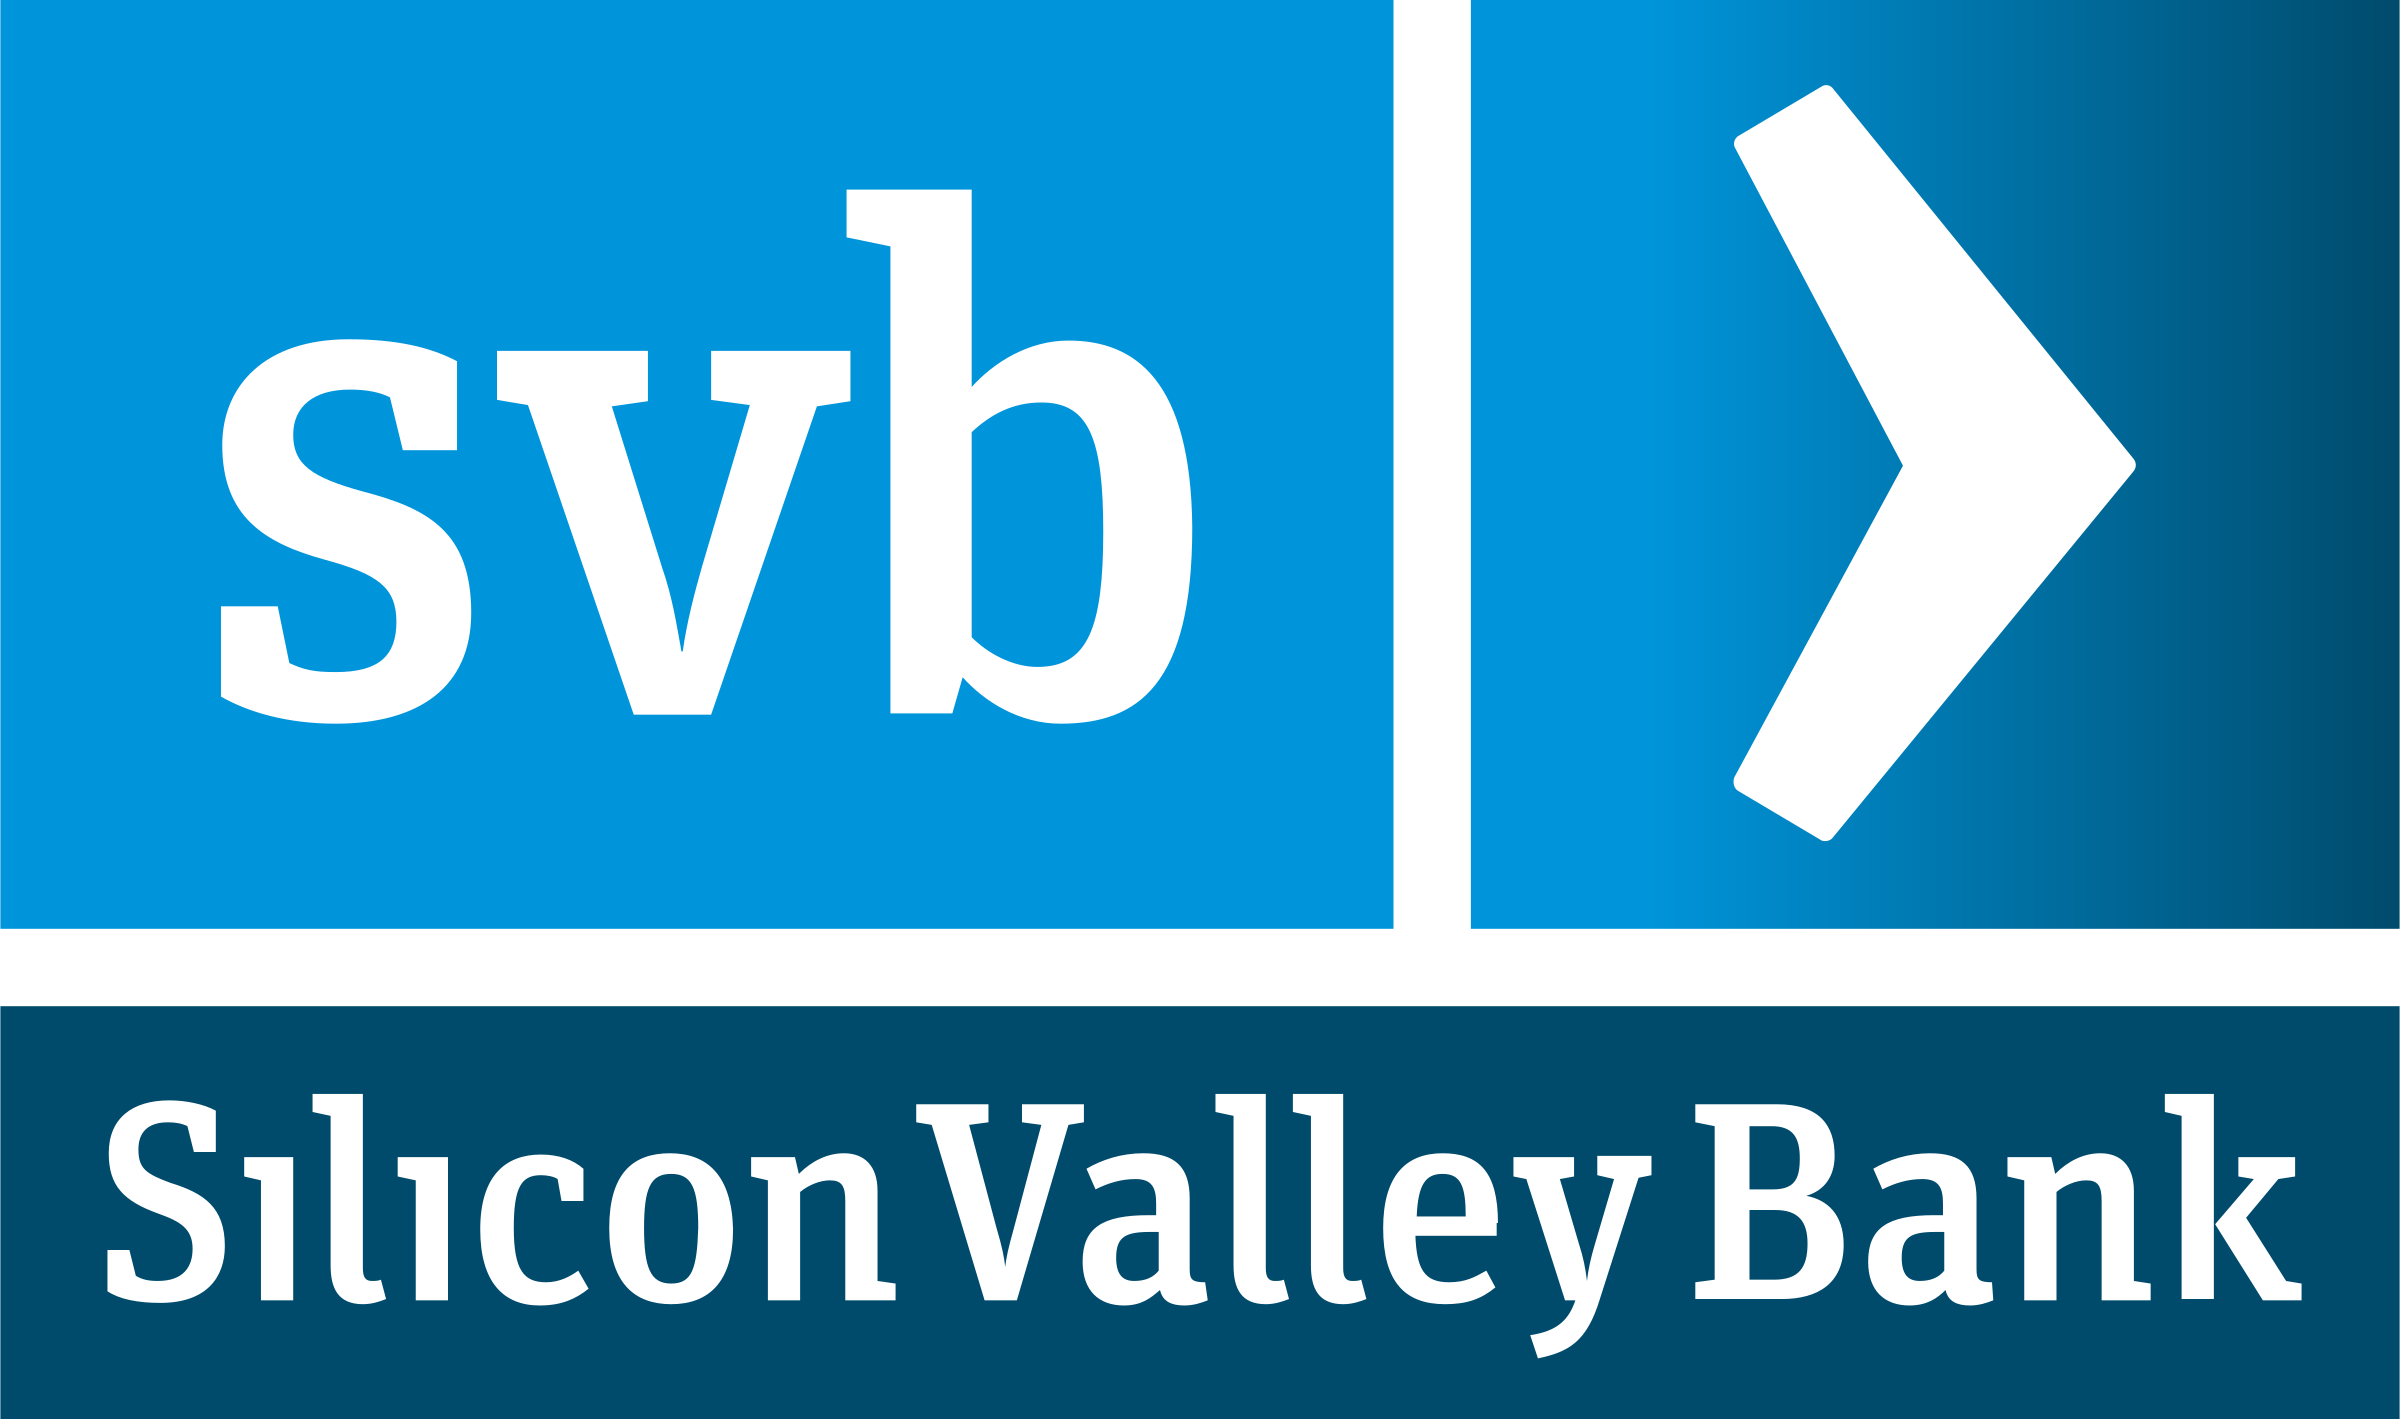 silicon-valley-bank-1-logo-png-transparent.png